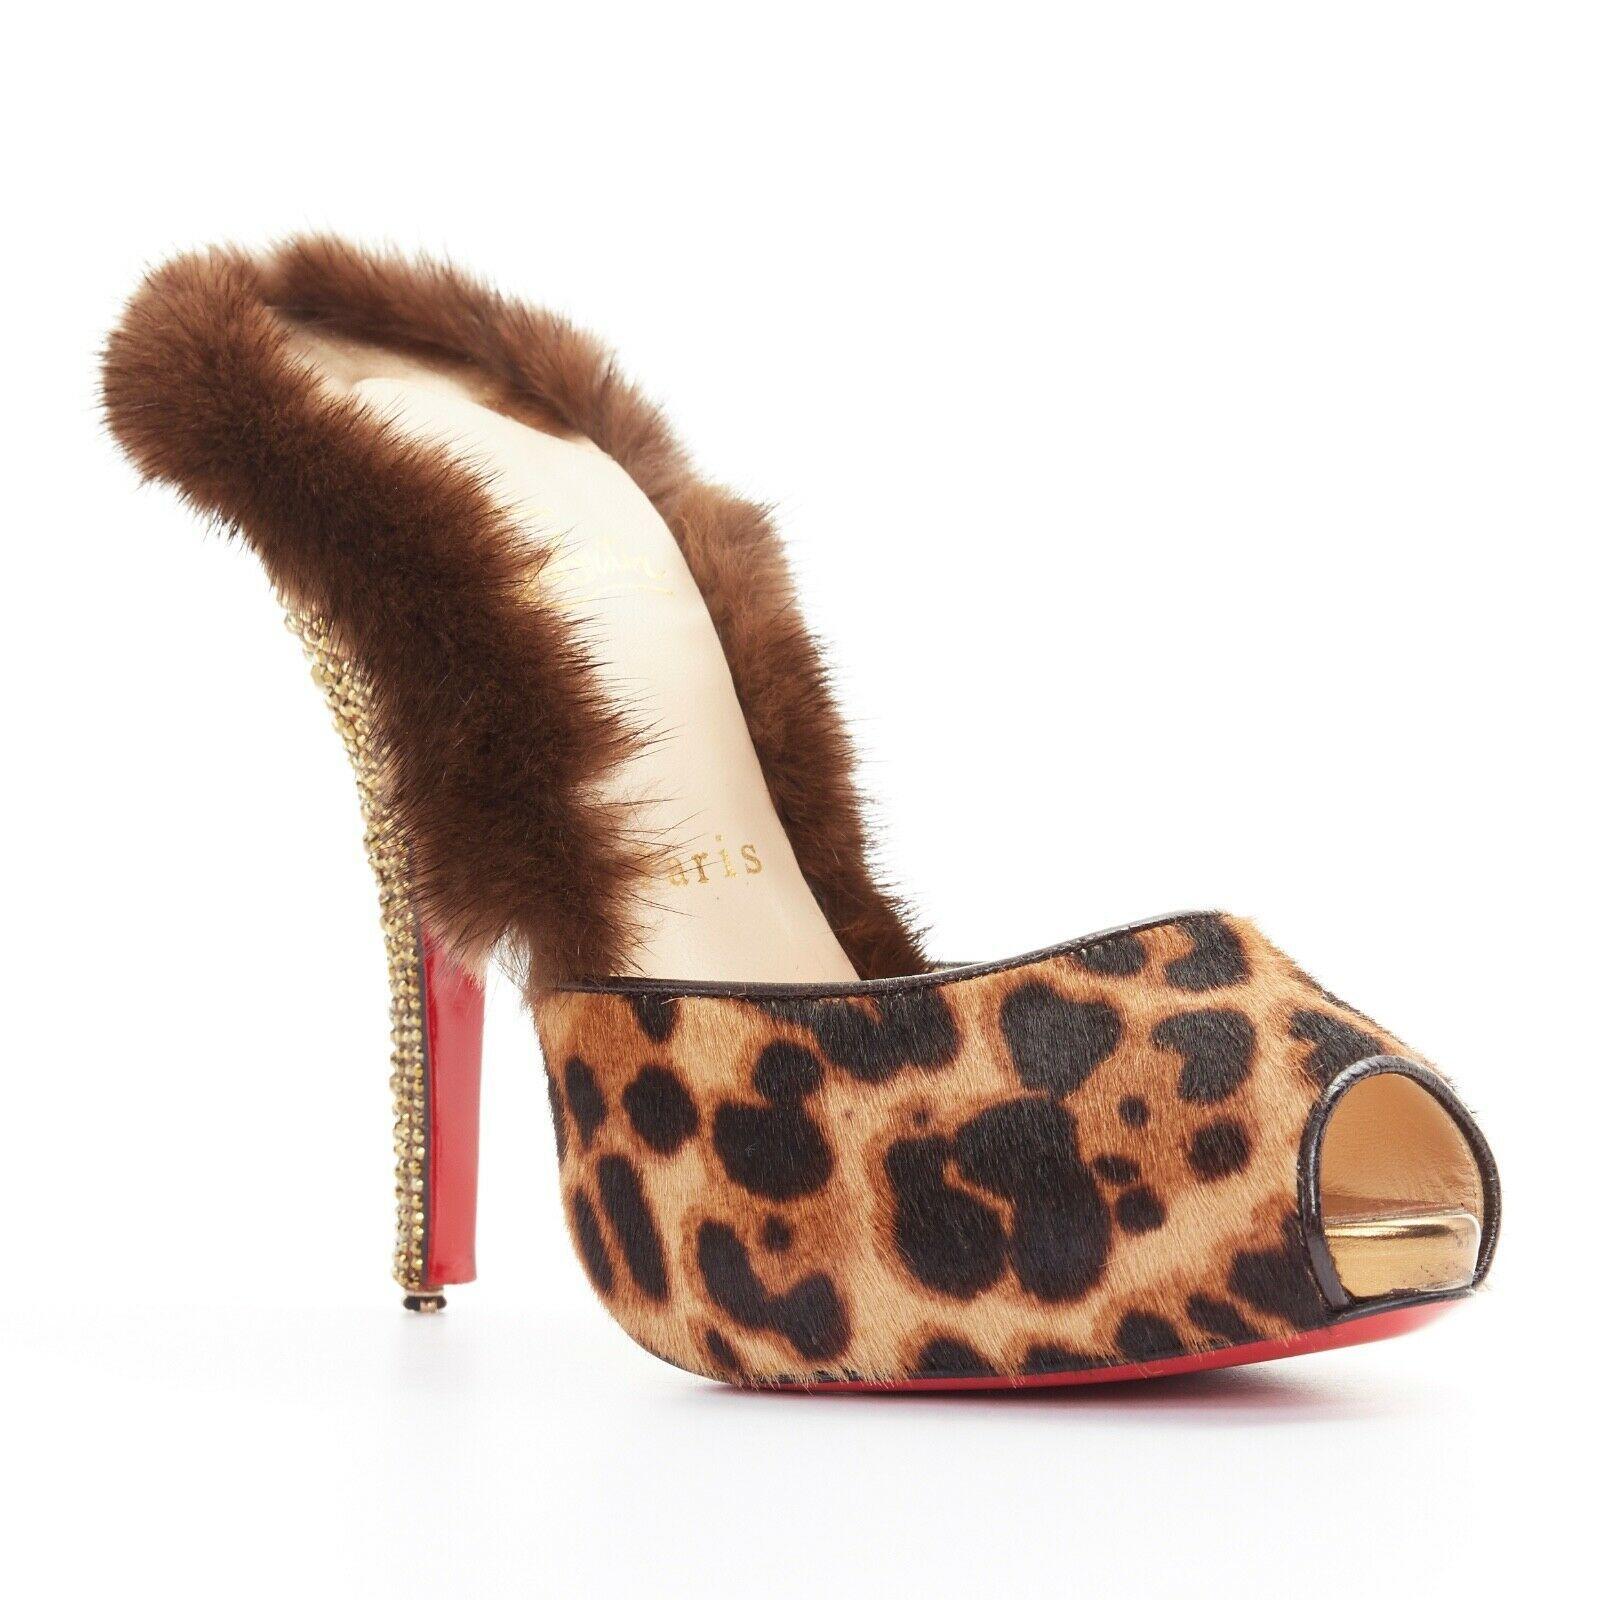 new CHRISTIAN LOUBOUTIN Nutria 120 leopard fur trimmed strass heel mule EU38
CHRISTIAN LOUBOUTIN
Leopard print calf-hair leather upper. 
Peep toe. 
Black leather trimming. 
Genuine brown mink fur trimming. 
Gold strass crystal embellished heel.